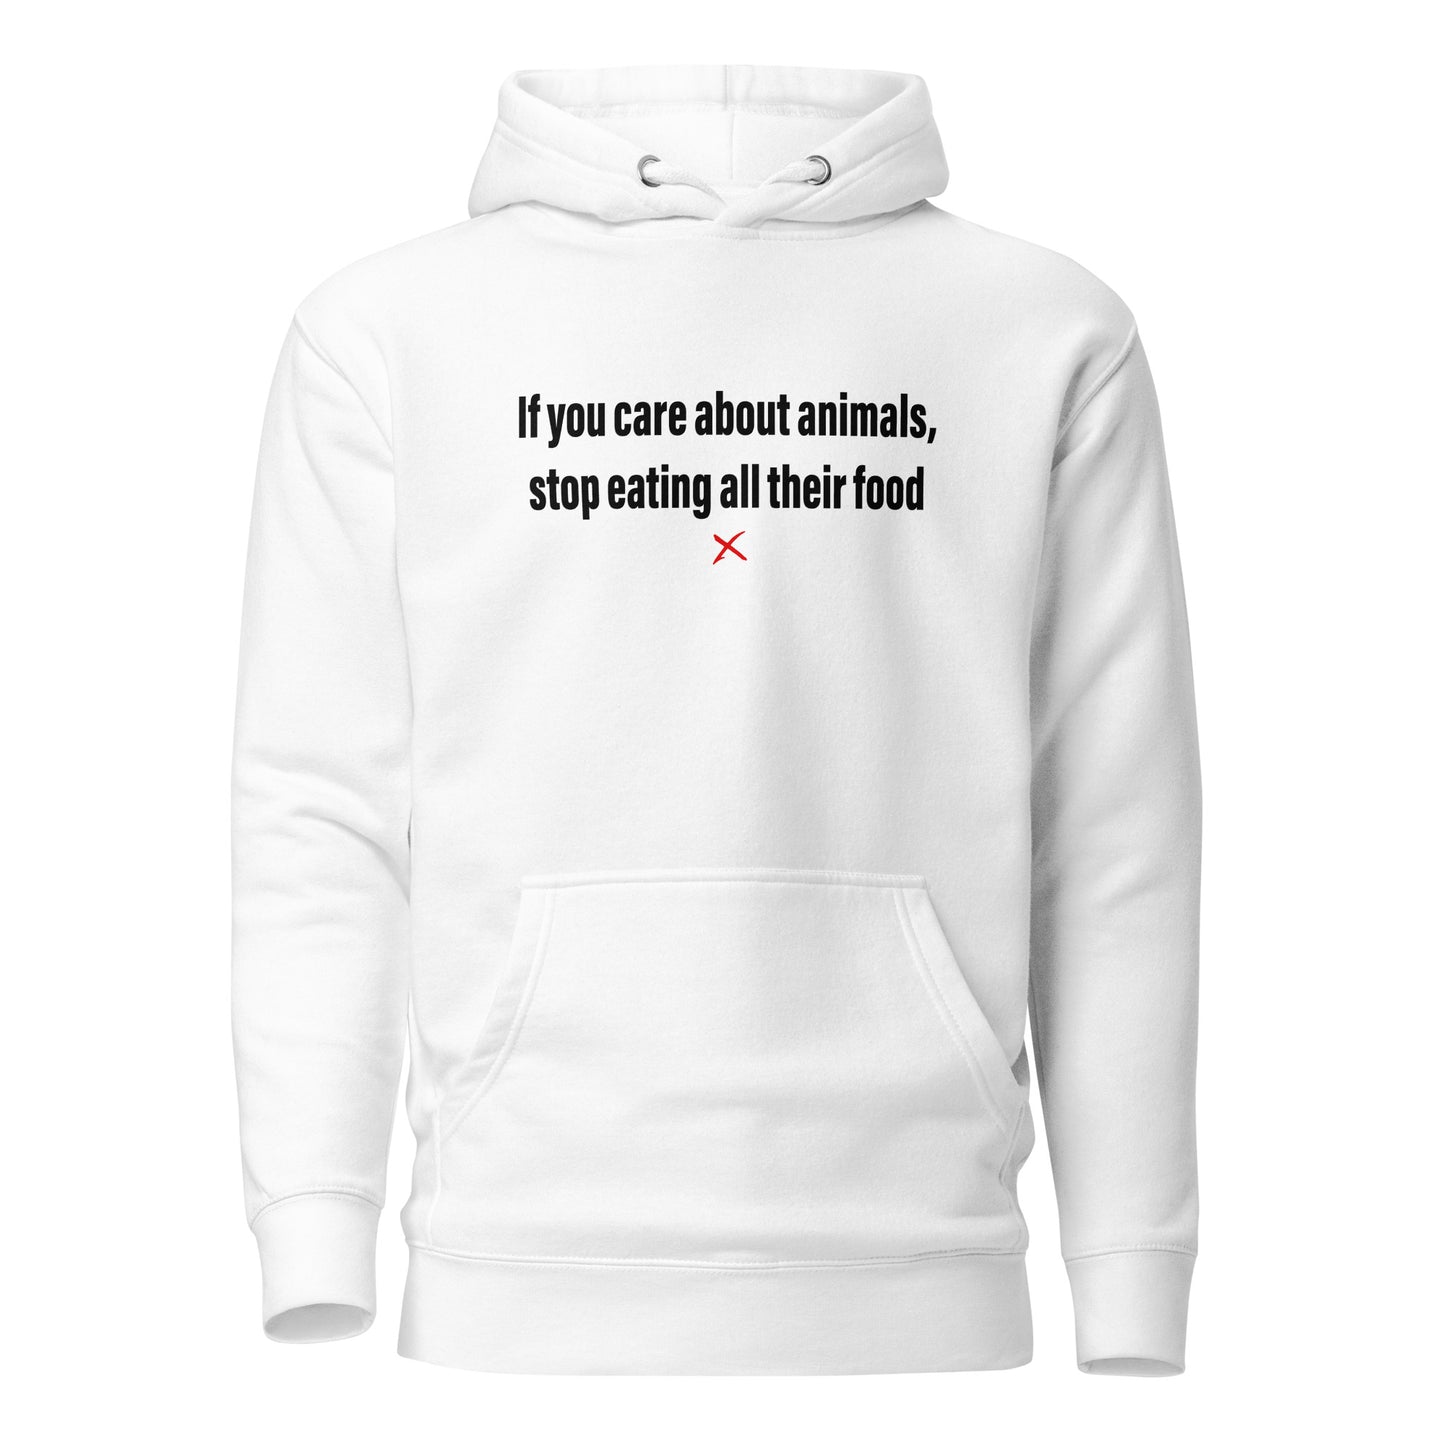 If you care about animals, stop eating all their food - Hoodie